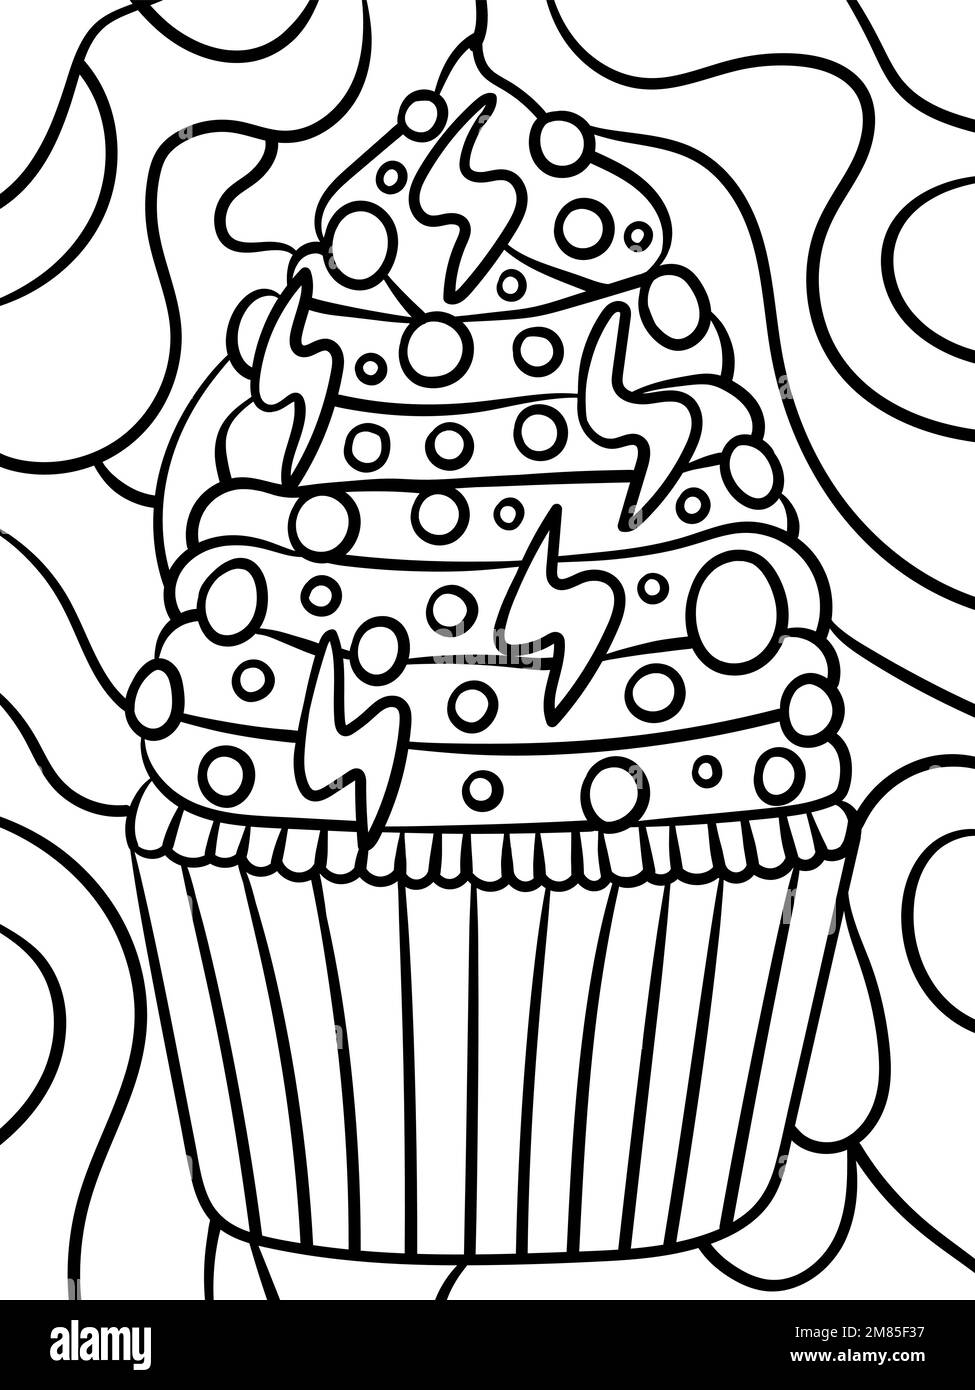 Muffin Sweet Food Coloring Page for Kids Stock Vector